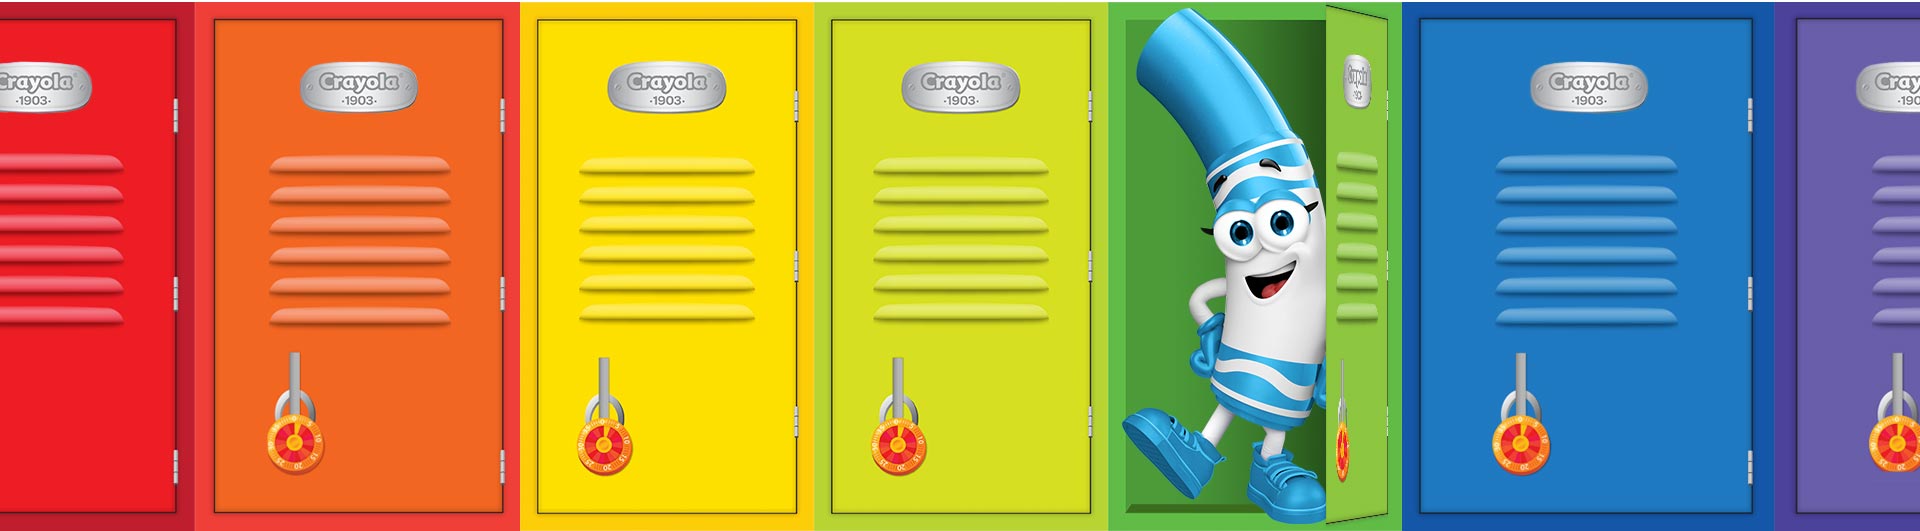 Crayola marker character standing in a locker in a row of rainbow colored lockers